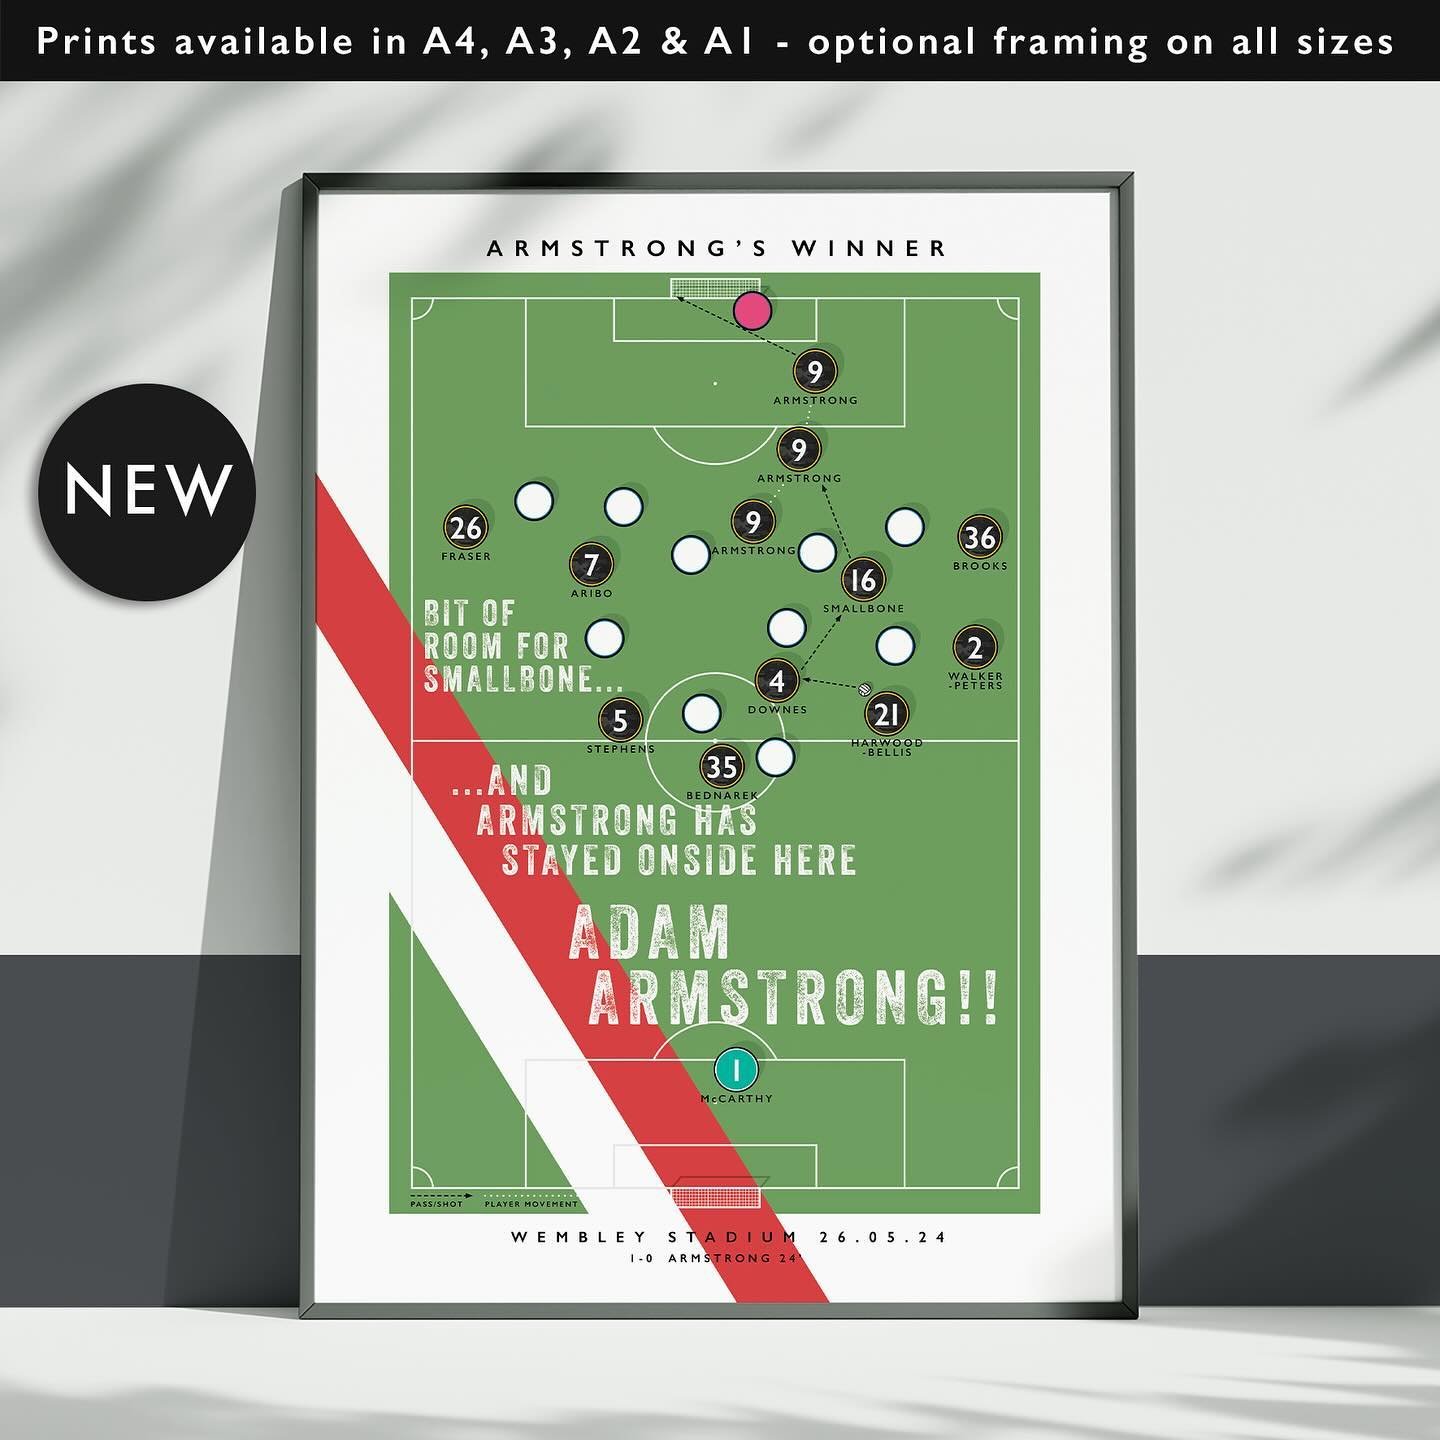 NEW: Southampton FC Armstrong&rsquo;s Winner

Get 10% off until midnight with the discount code:
THE-SAINTS 

Shop now: matthewjiwood.com/goooal/armstro&hellip;

Prints available in A4, A3, A2 &amp; A1 with optional framing 

#SouthamptonFC #SaintsFC